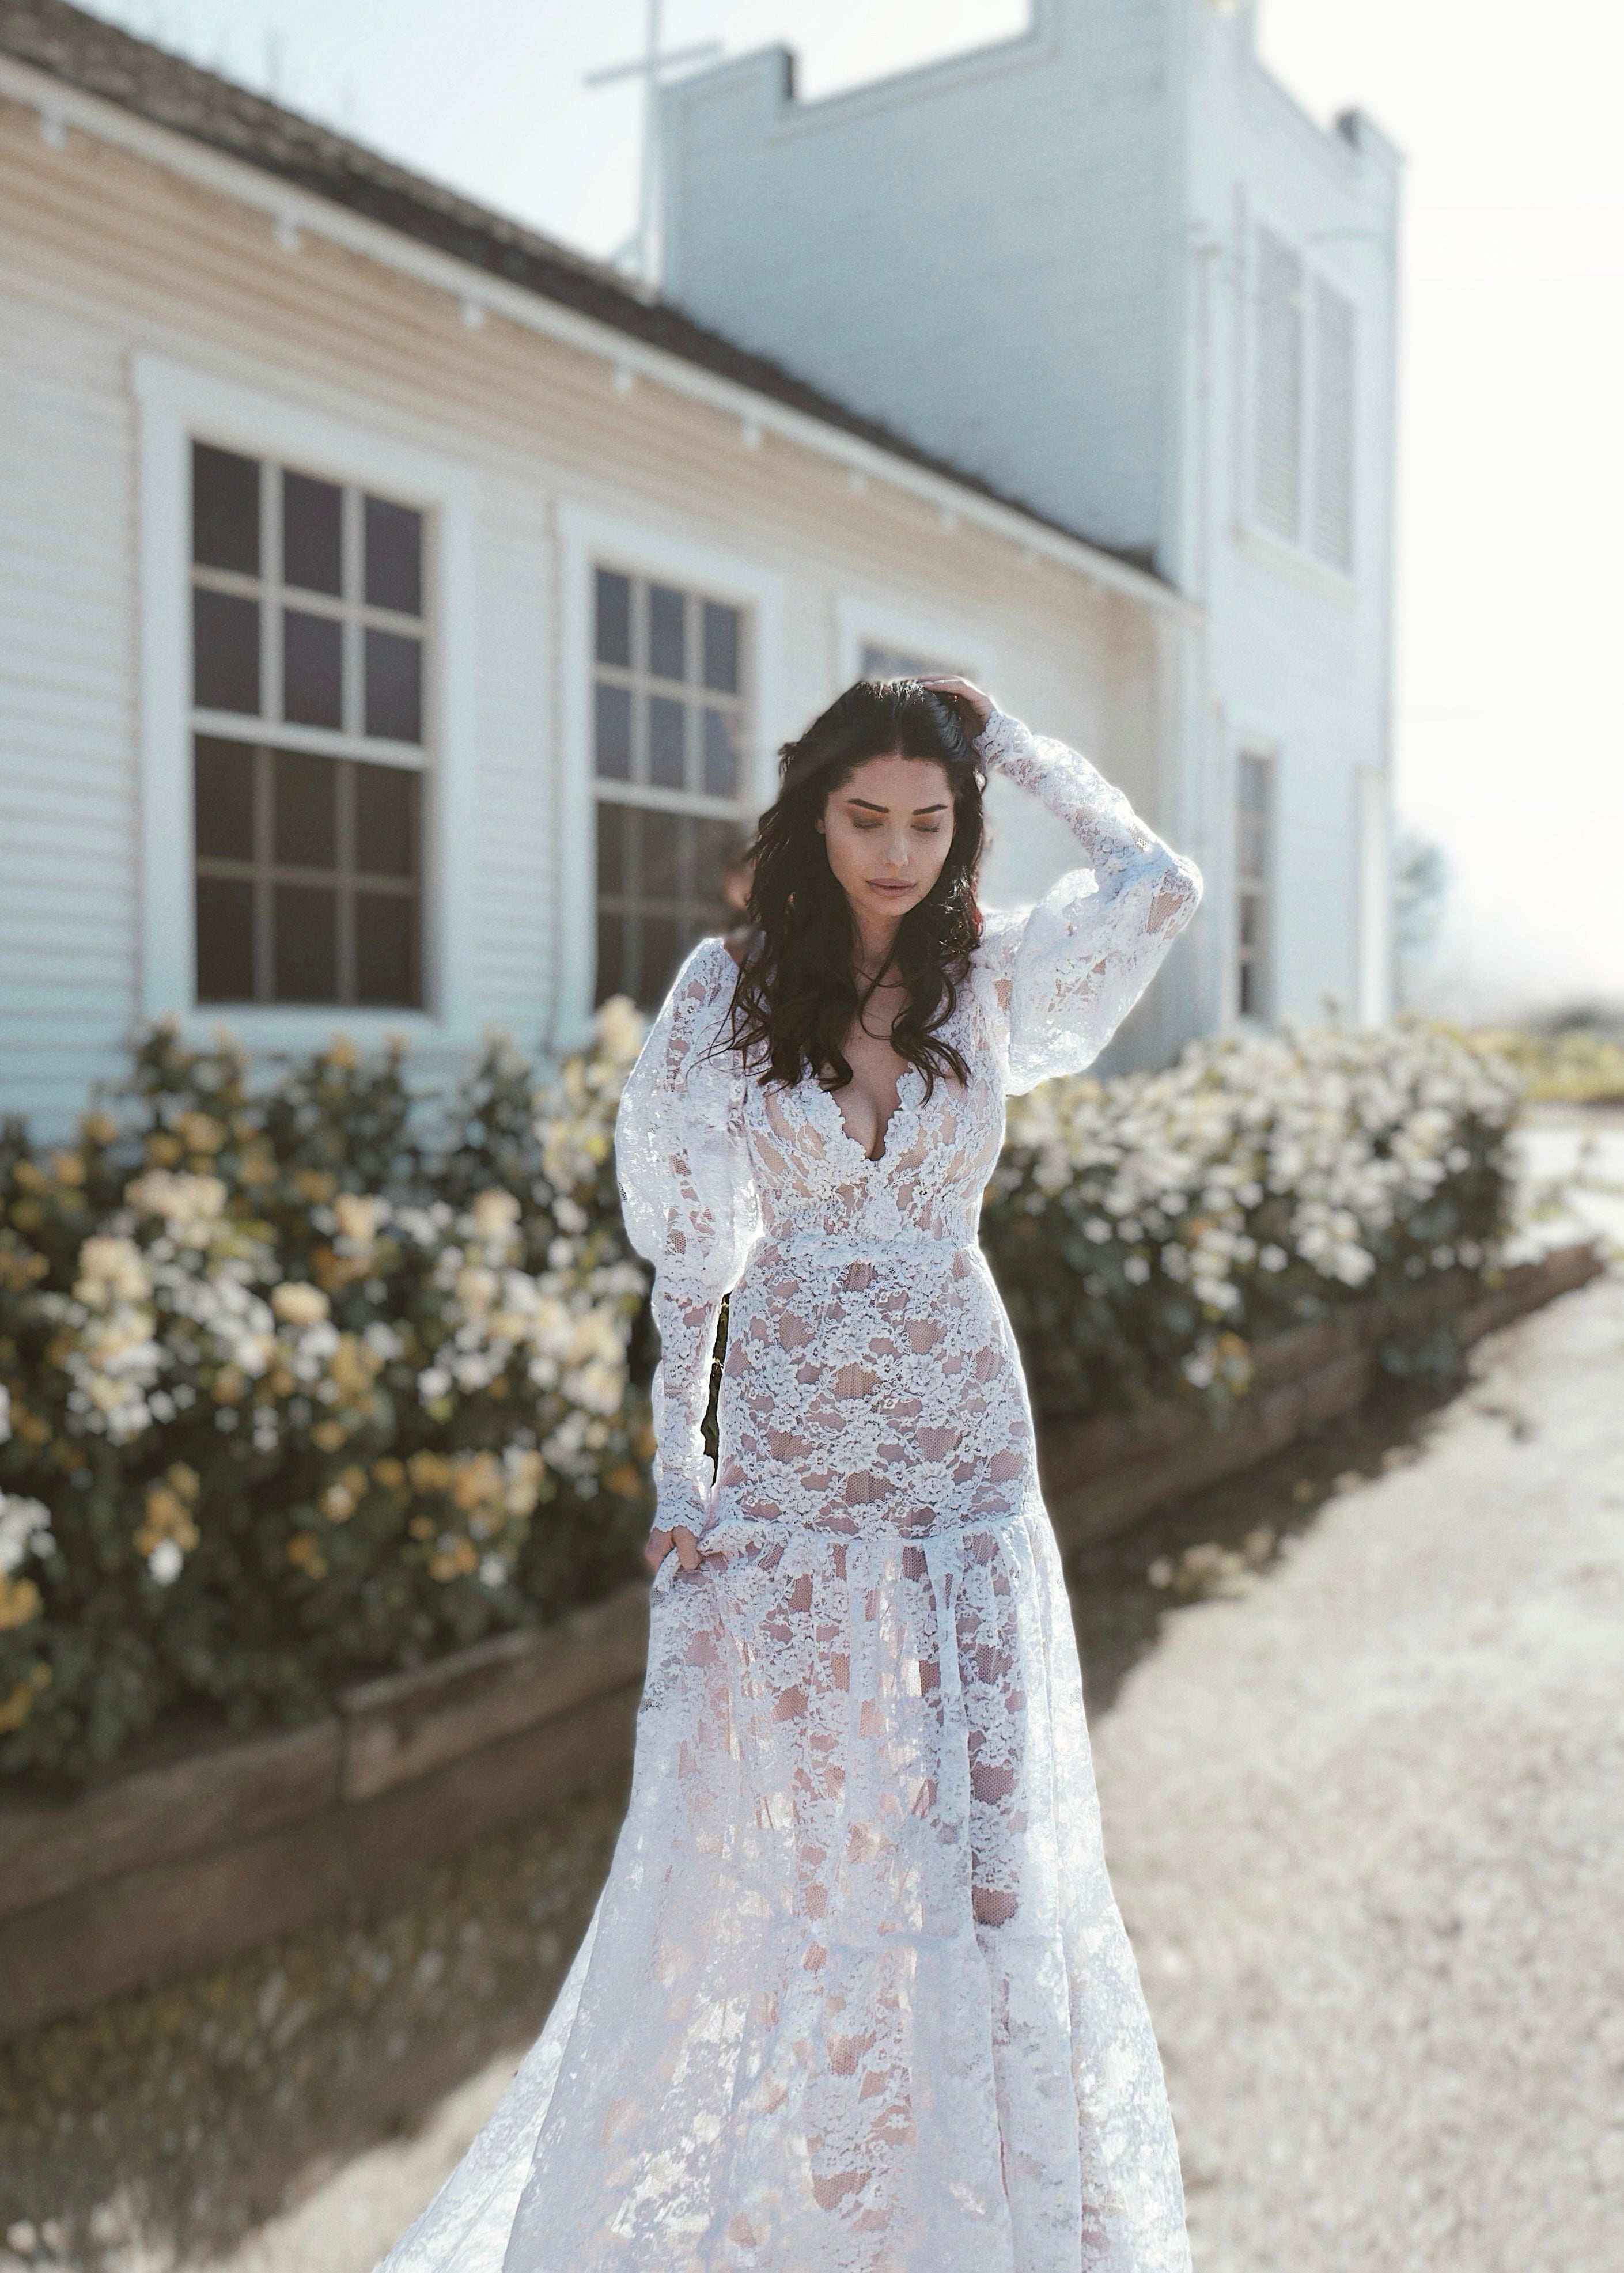 Romantic and vintage inspired lace wedding dress with long sleeves by Lauren Elaine.